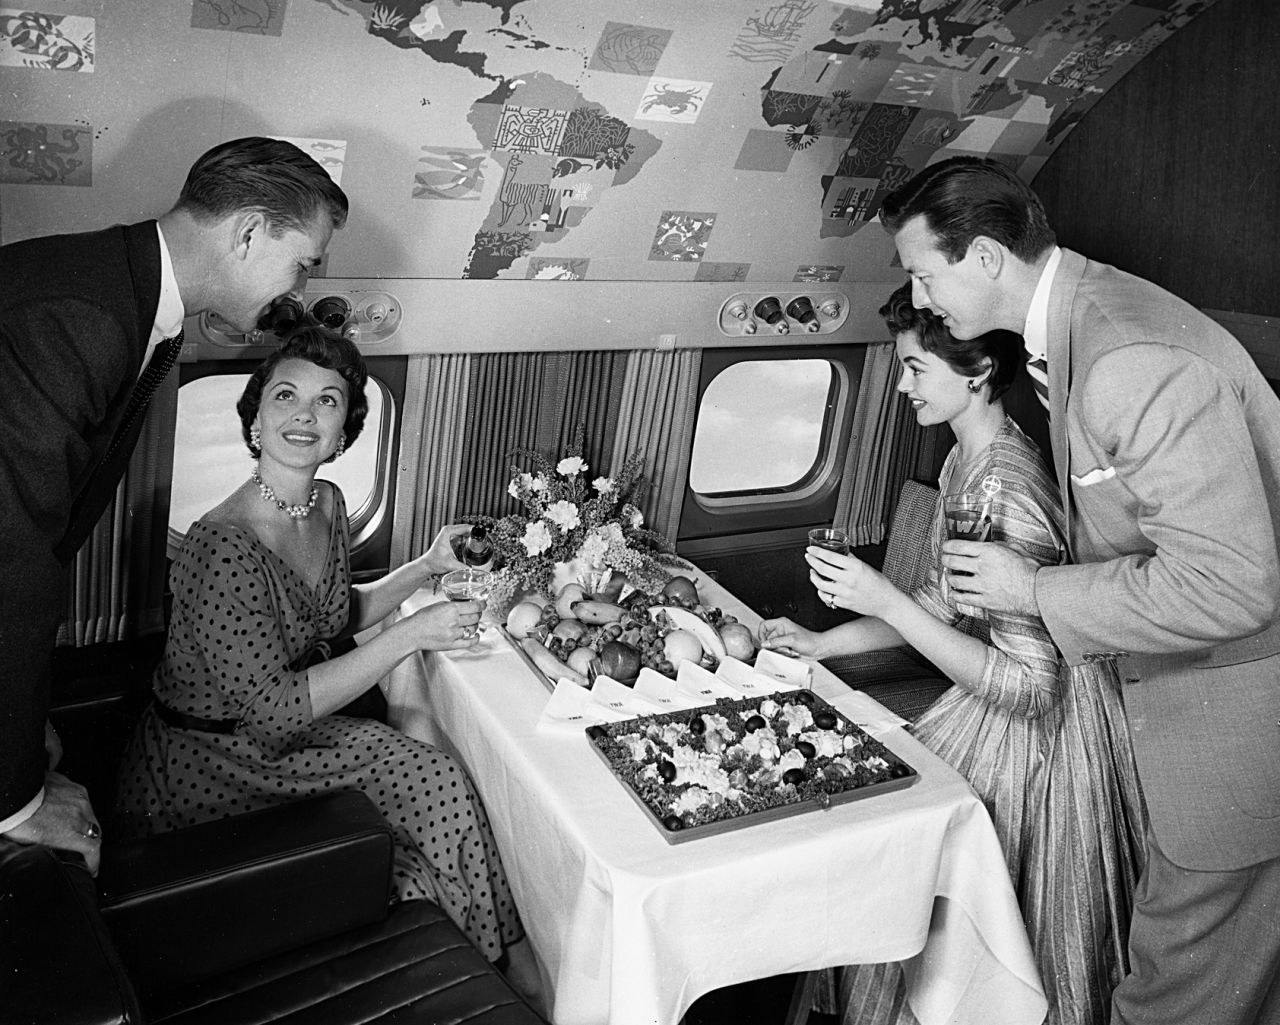 Sixty years ago, air travel was a glamorous concept.